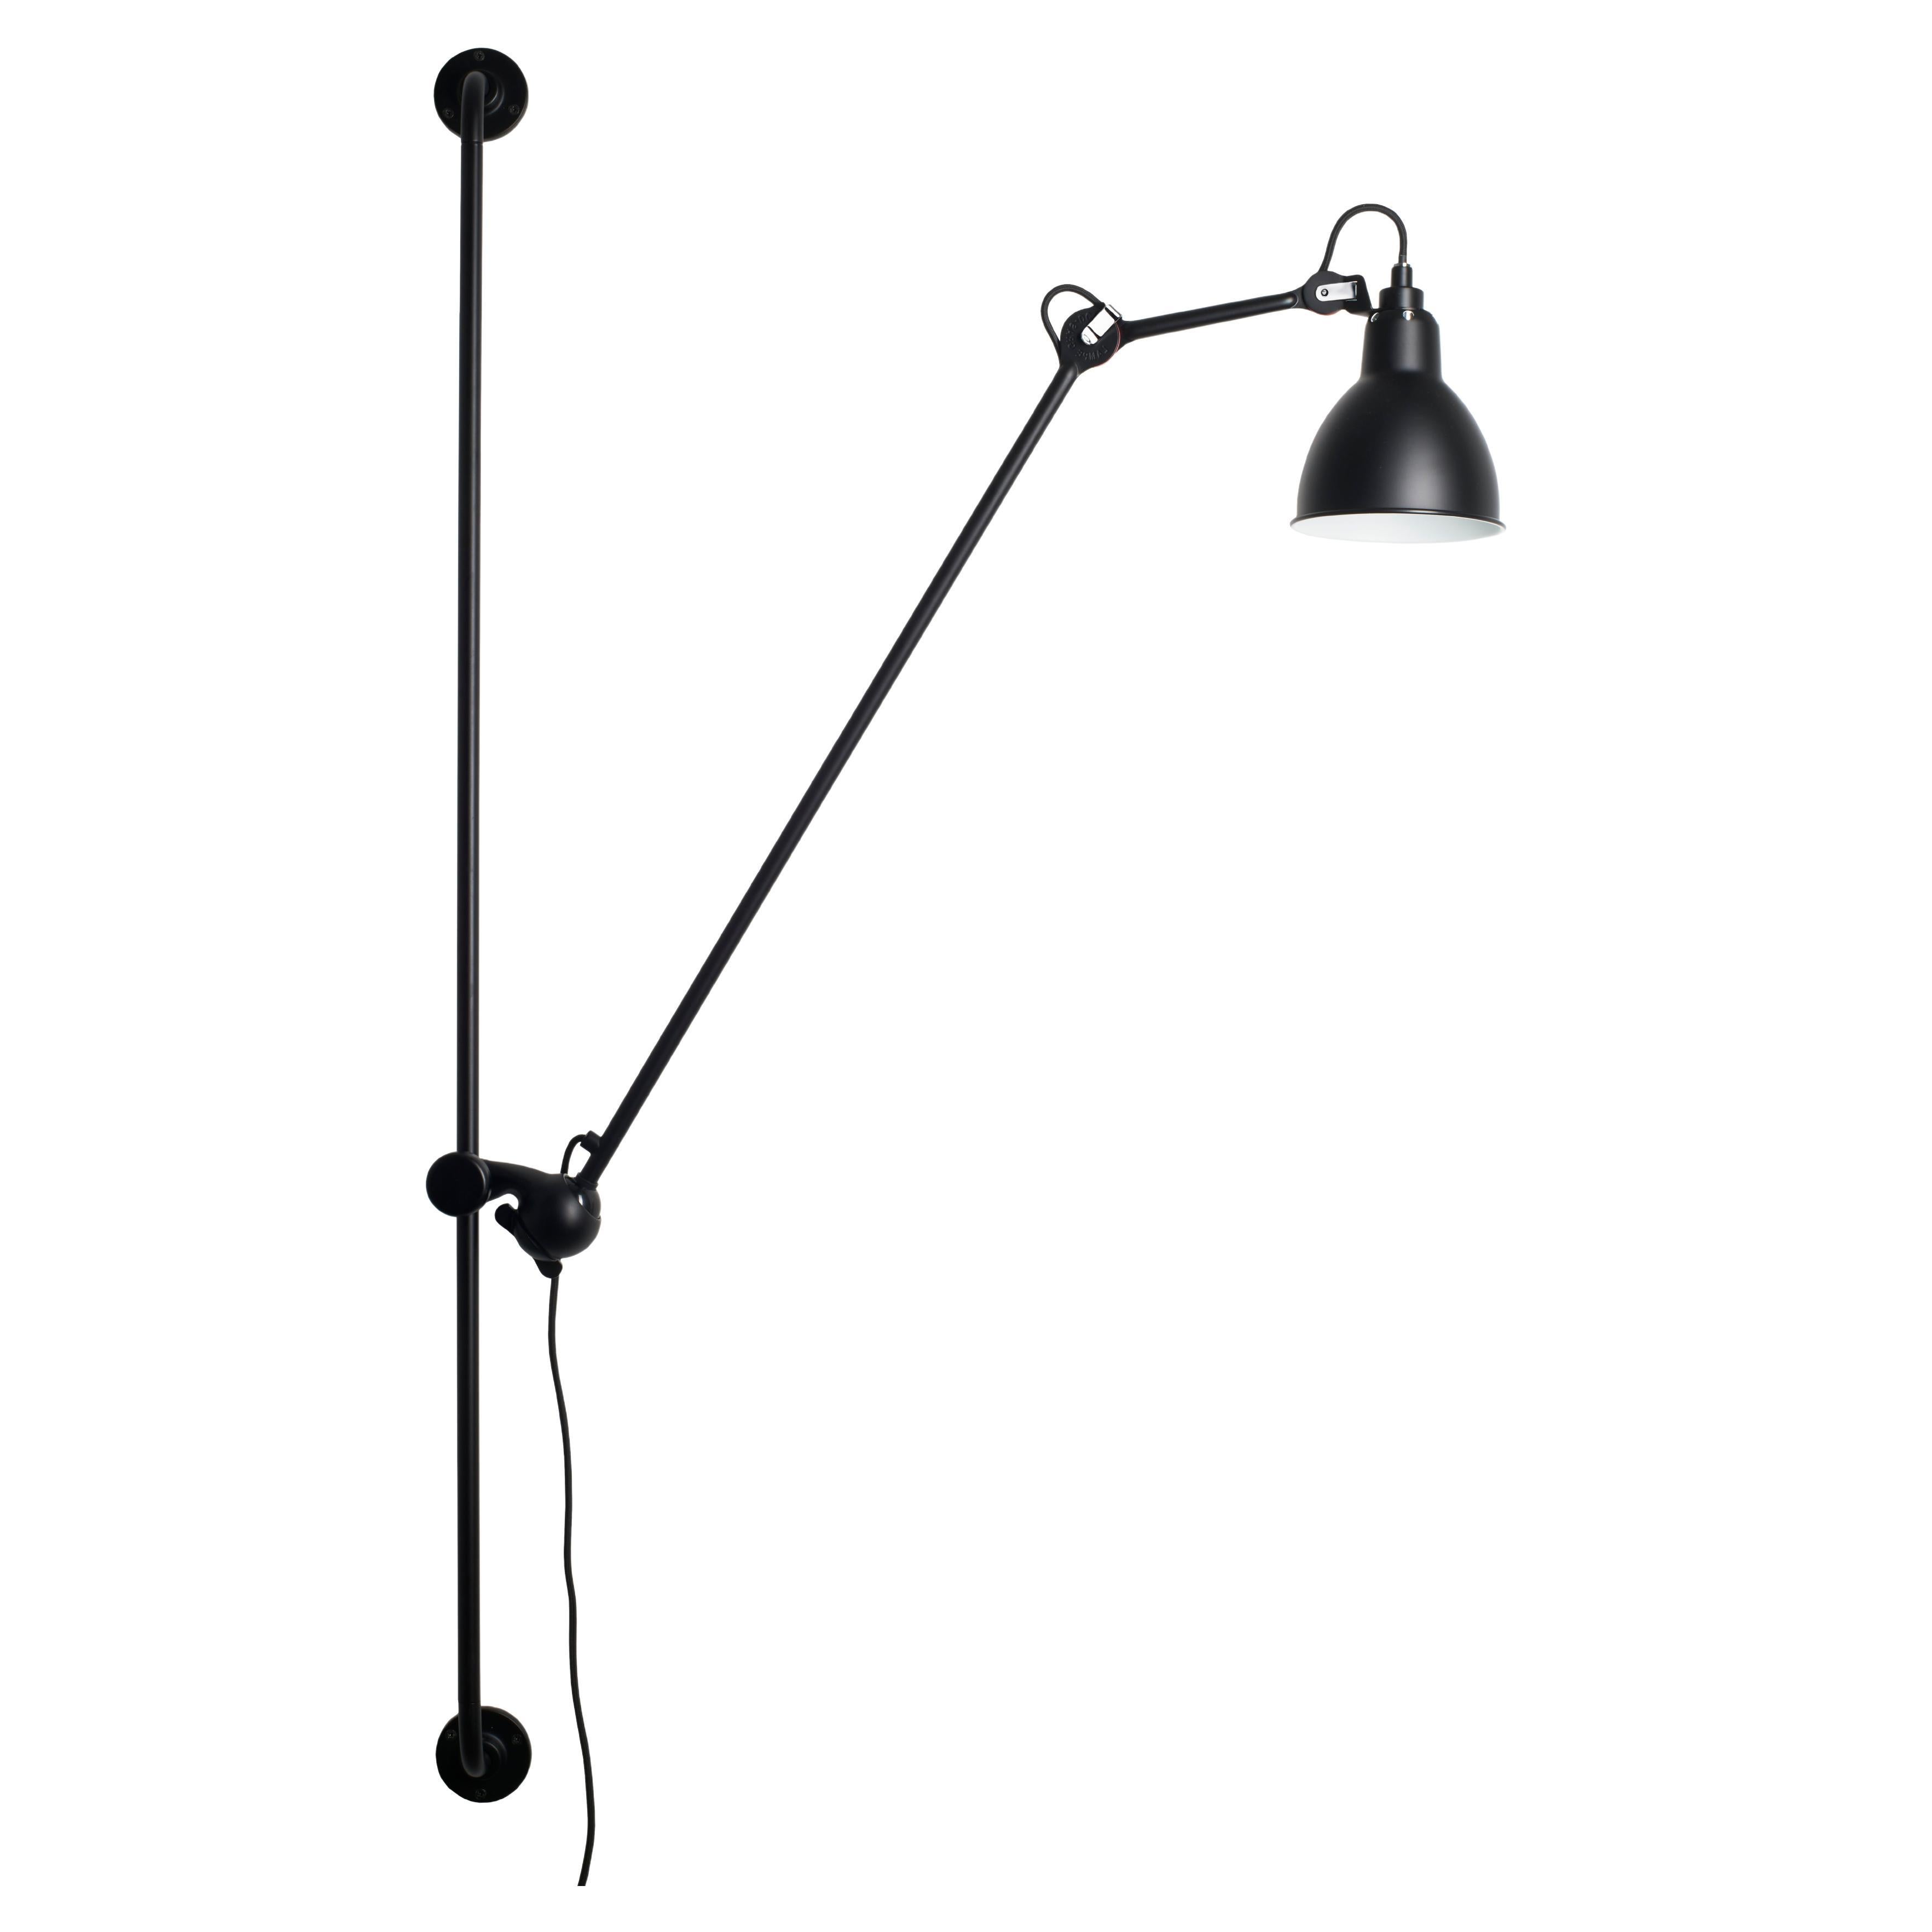 DCW Editions La Lampe Gras N°214 Round Wall Lamp in Black Arm and Shade